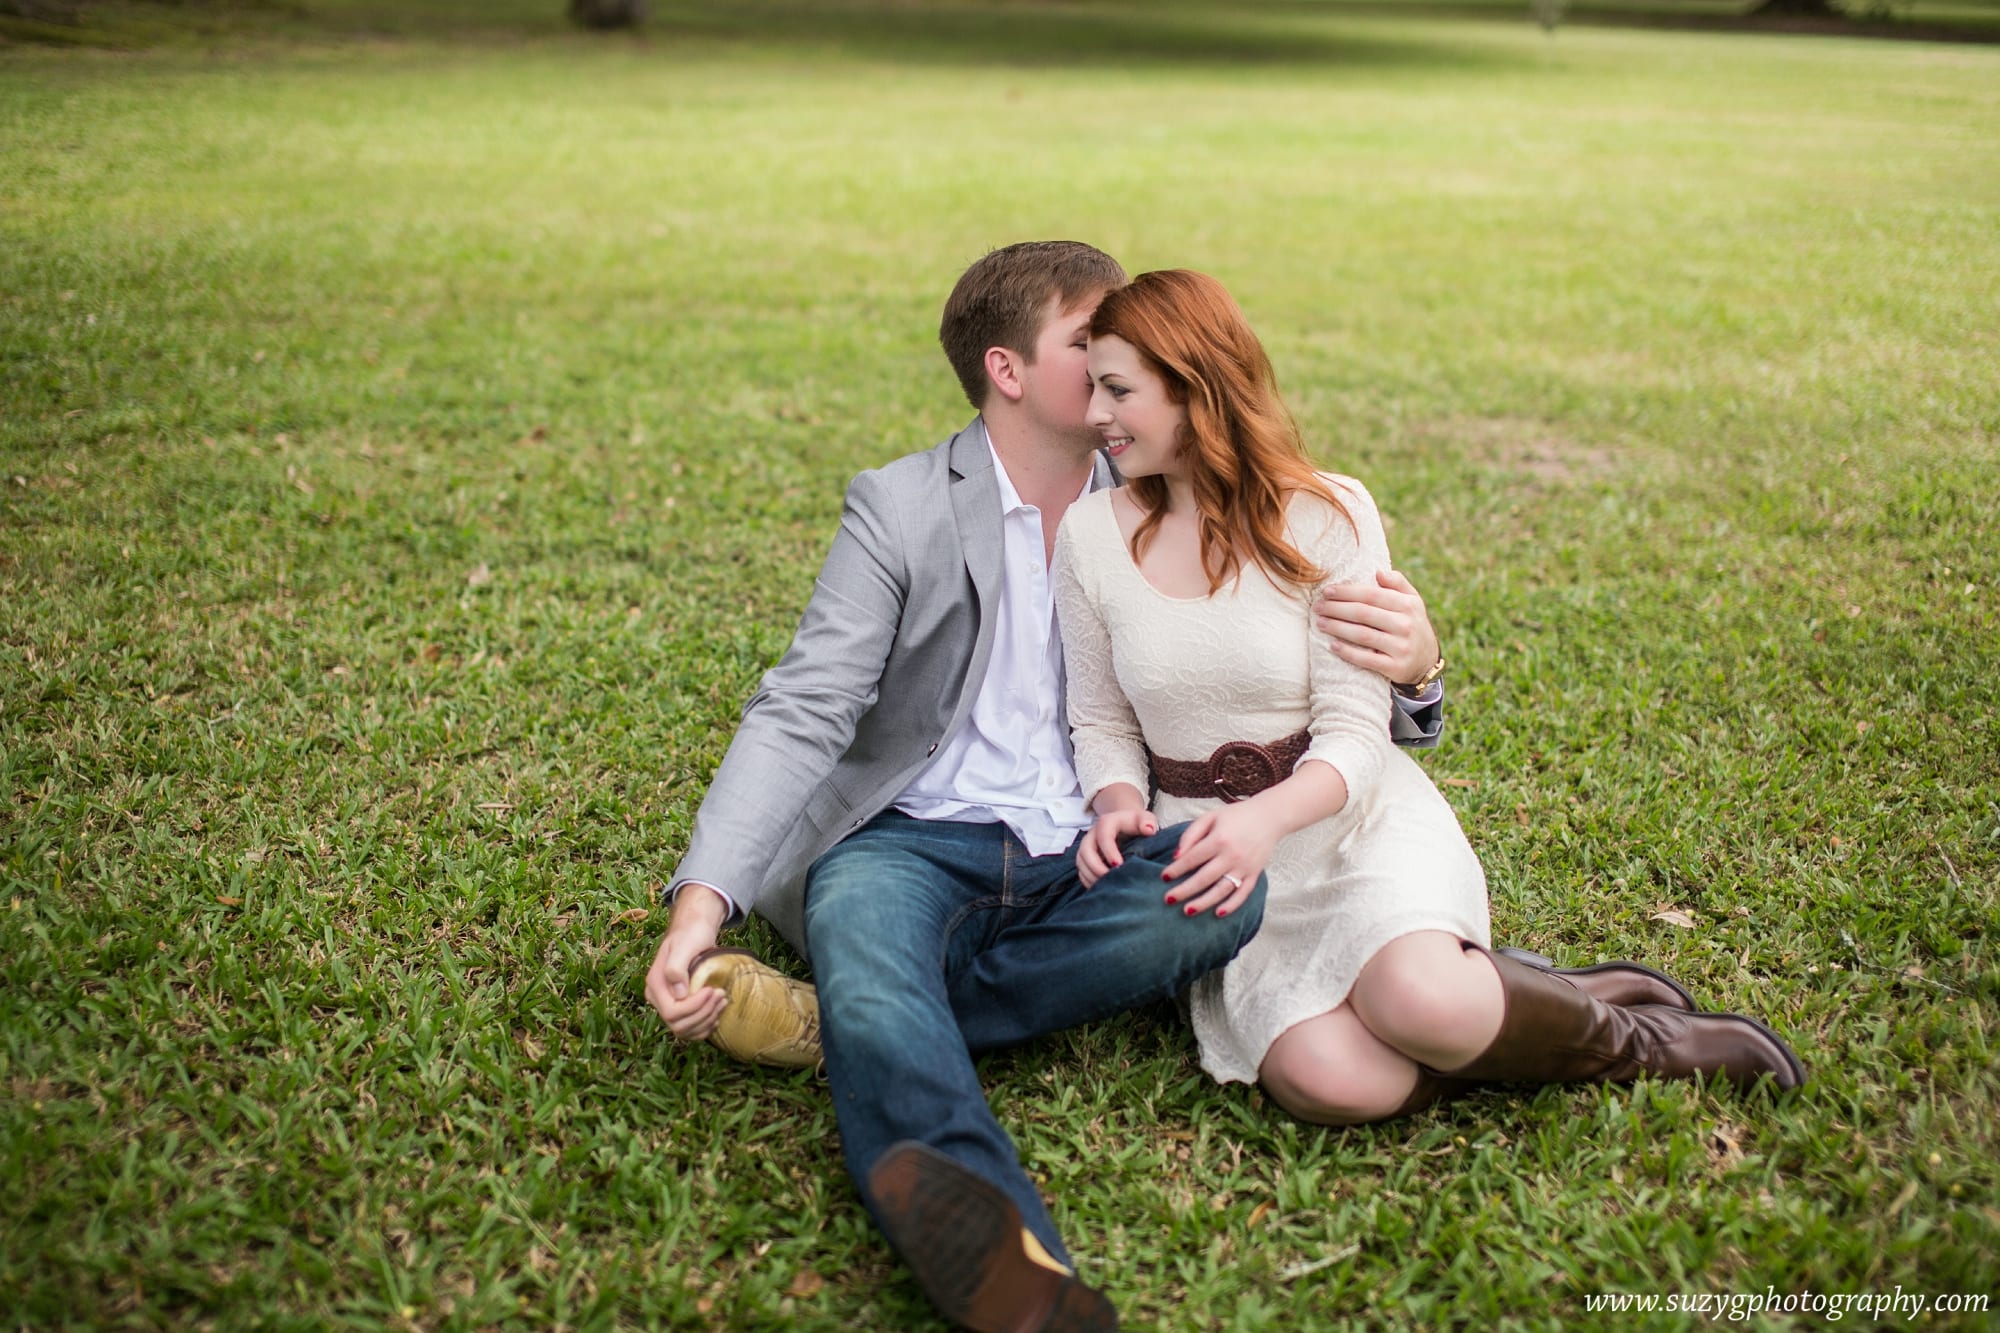 engagements-new orleans-texas-baton rouge-lake charles-suzy g-photography-suzygphotography_0134